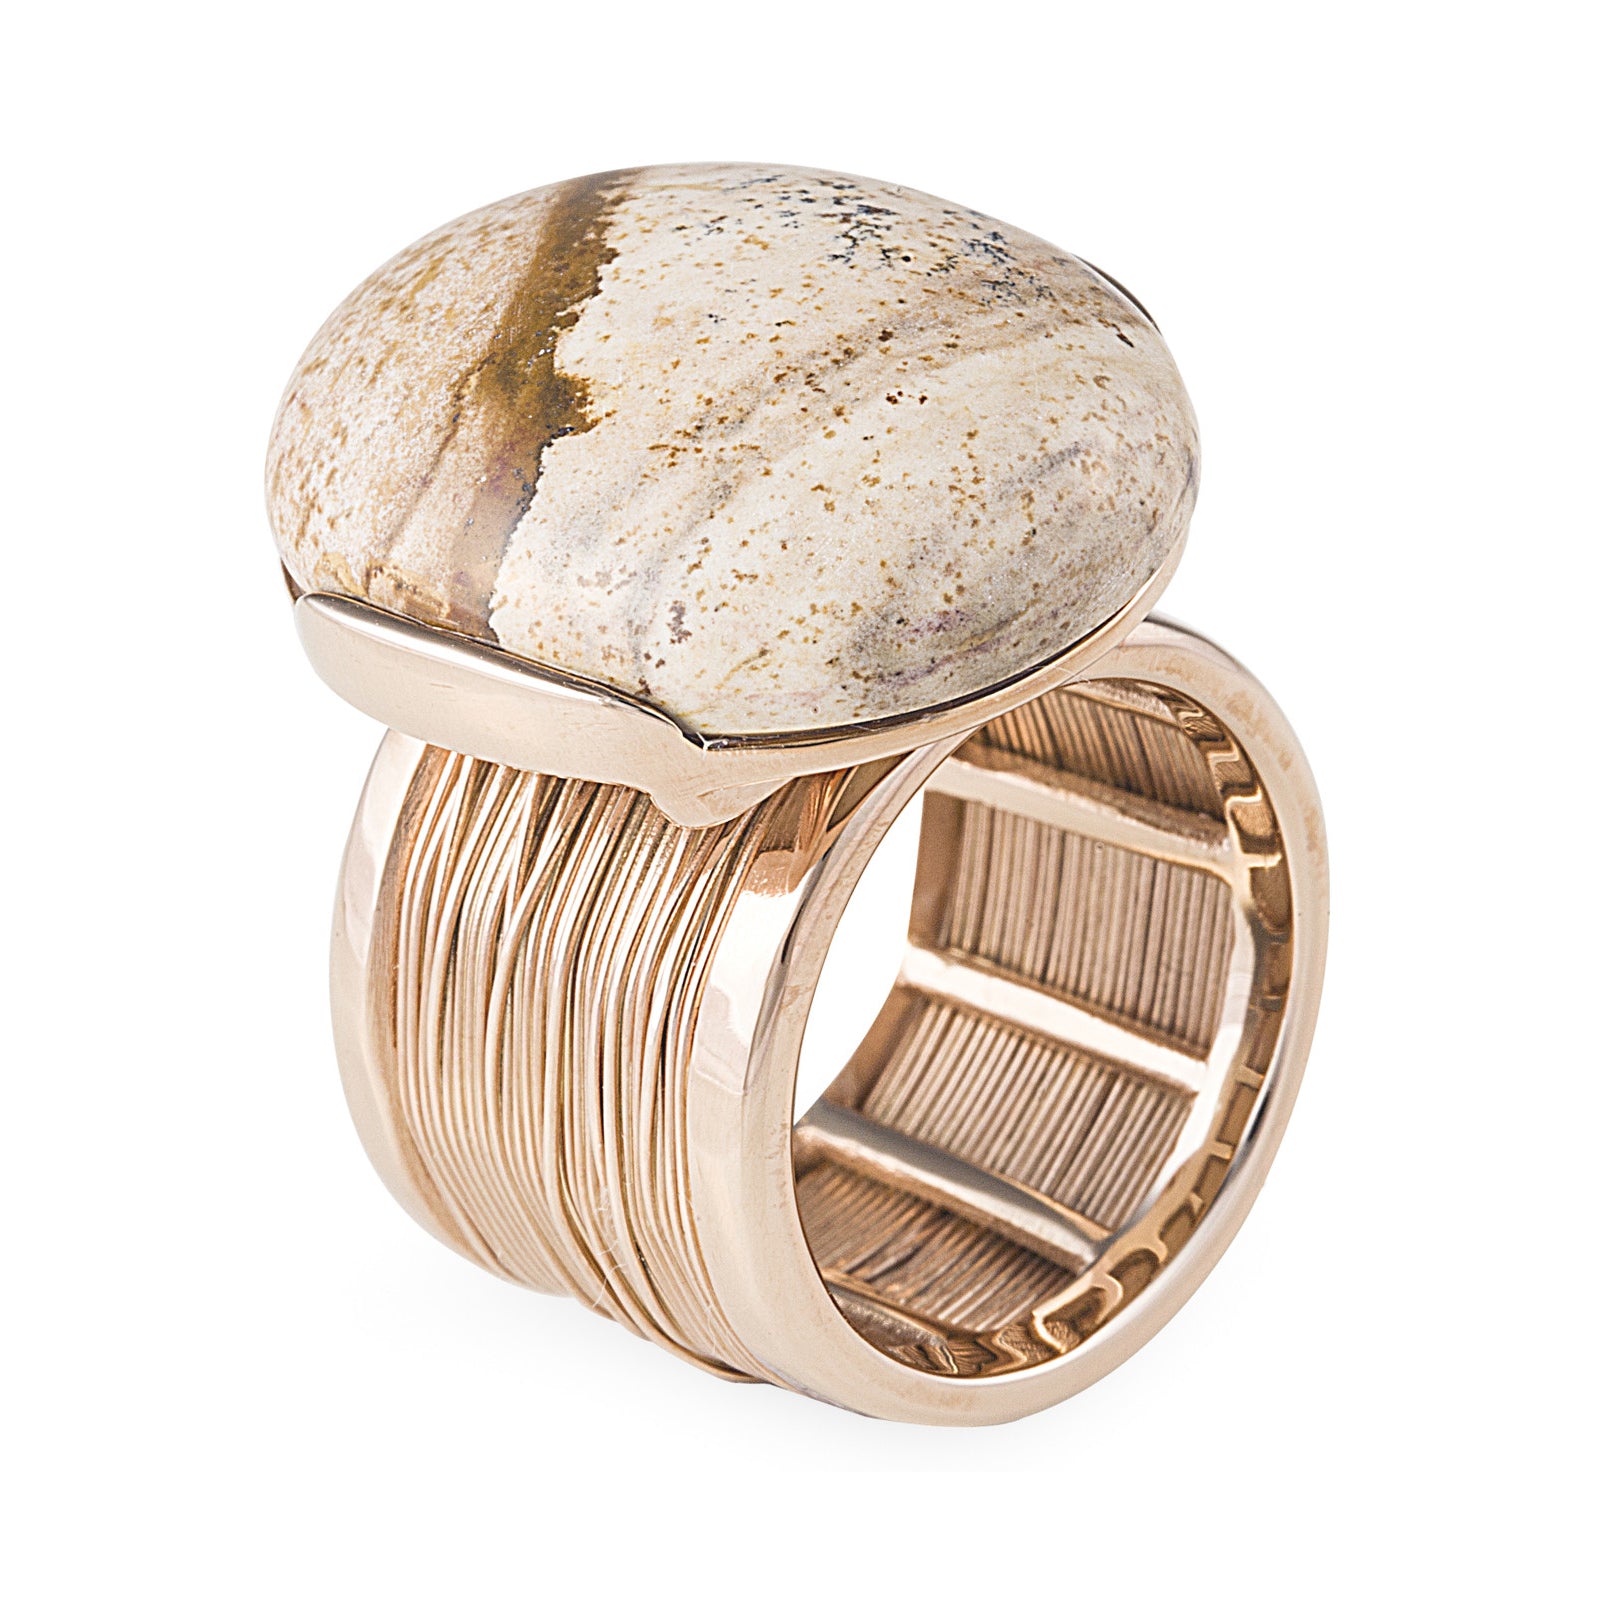 Sahara Ring in Rose Gold with Polished Natural Desert Stone. Worldwide Shipping. Affordable luxury jewellery by Bellagio & Co.